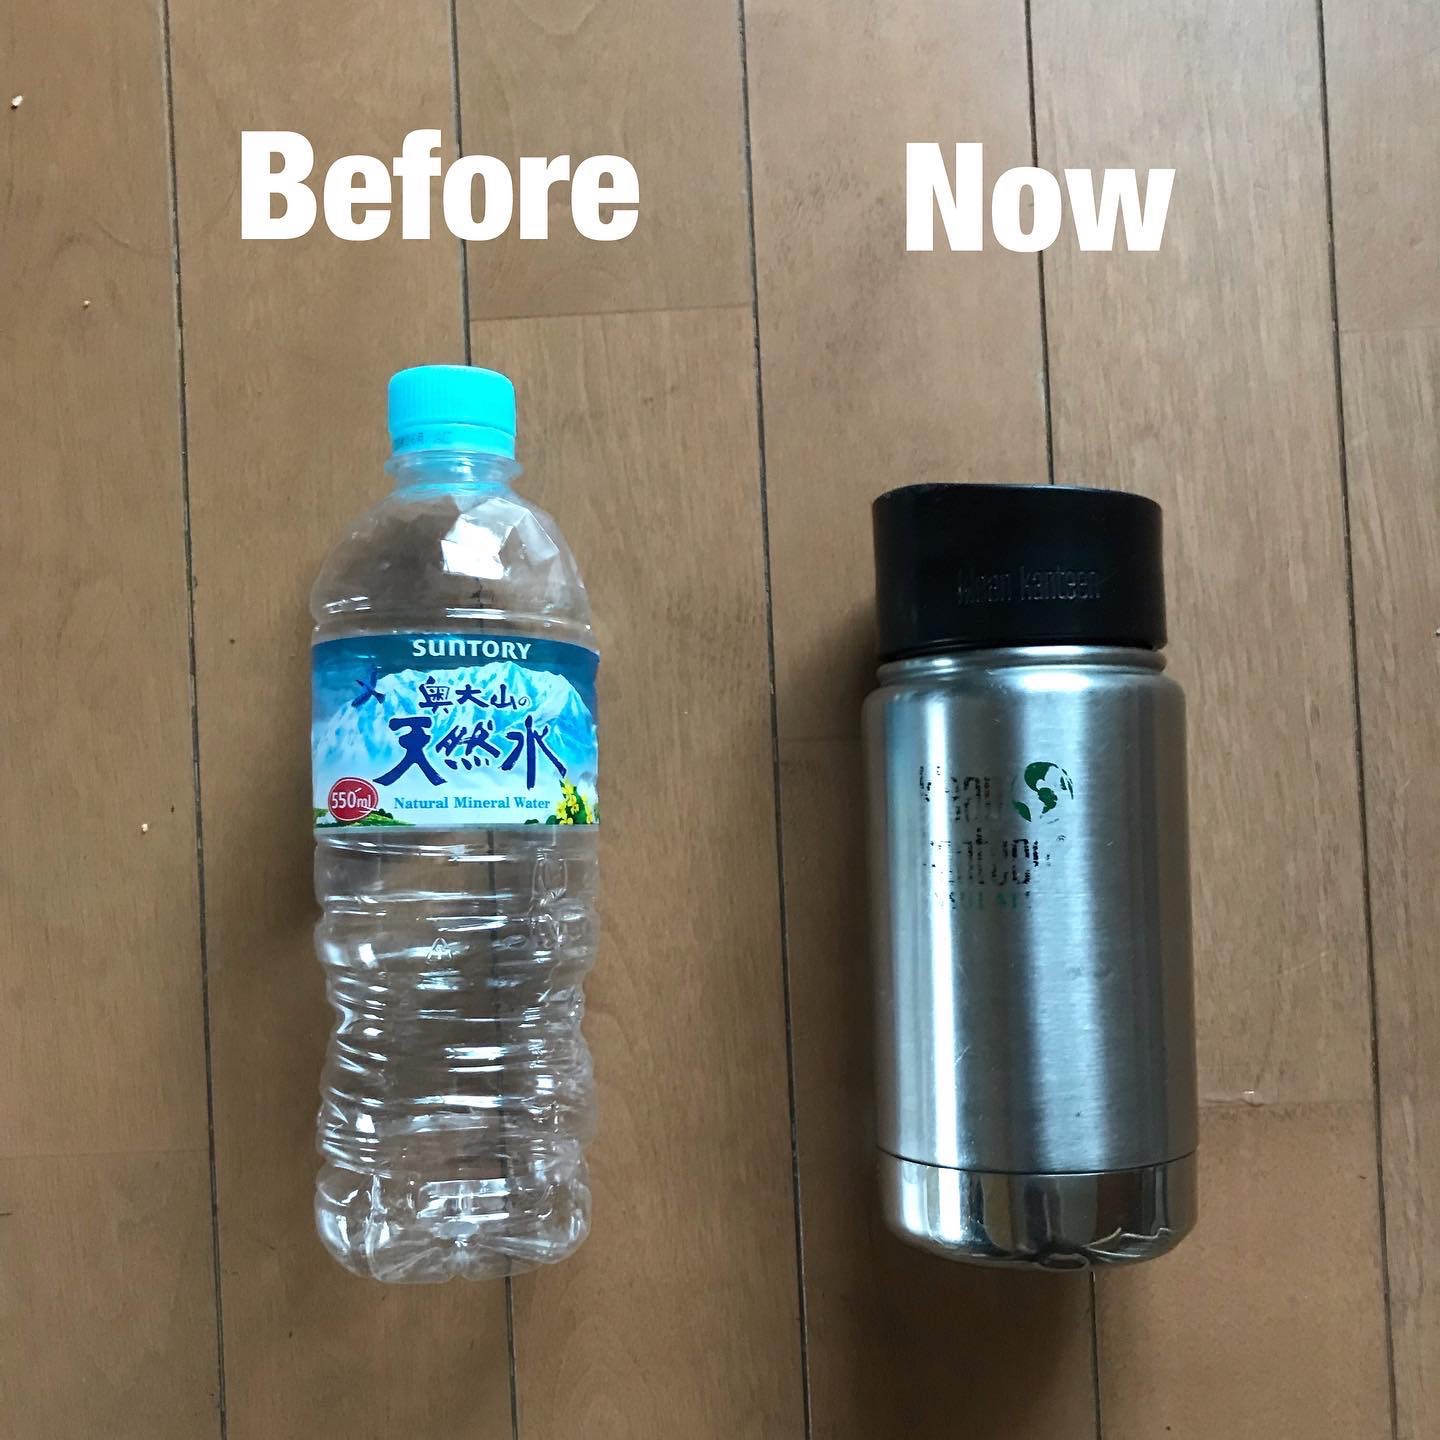 Before→I had a bad habit of buying bottled water while out and about? Now→ A stainless steal bottle that I could refill made sense?